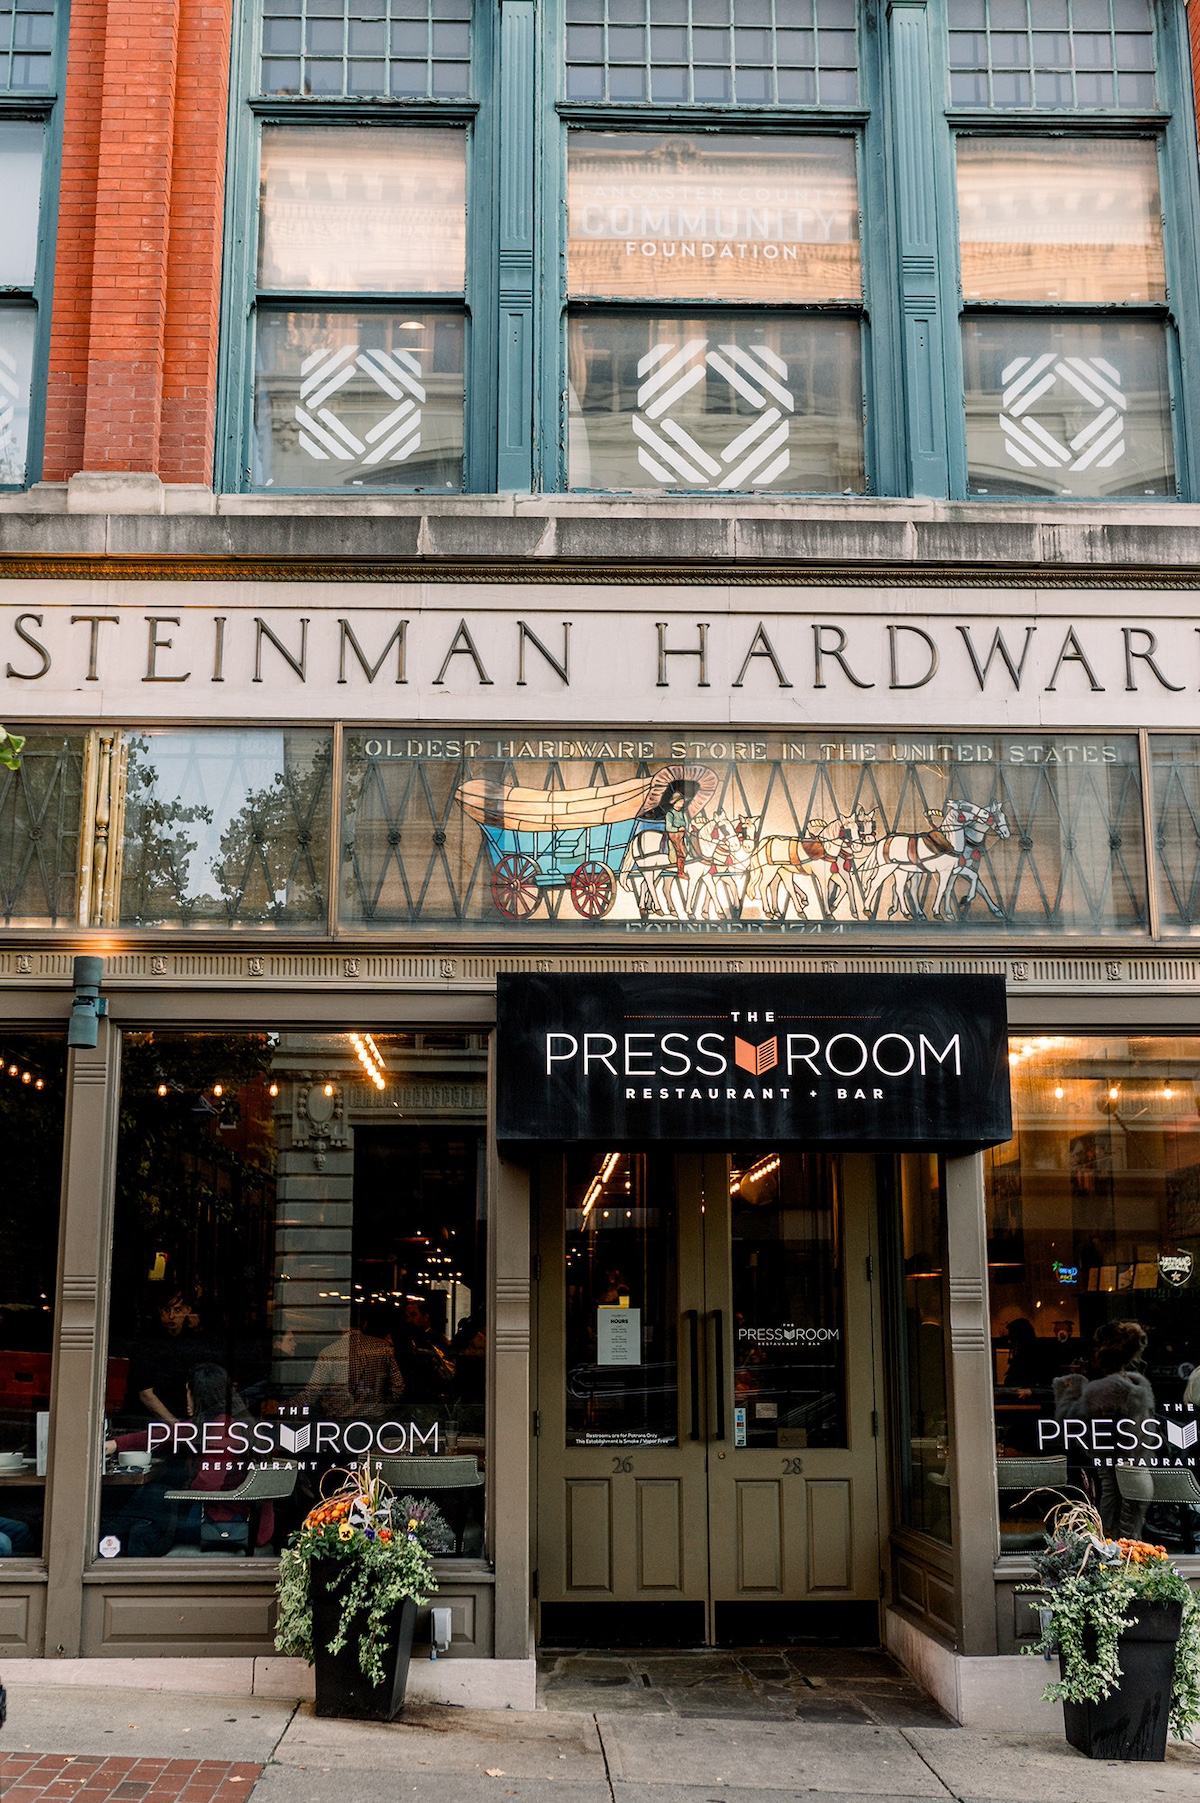 The historic charm of the Pressroom Restaurant sets the perfect backdrop for a lively welcome party.